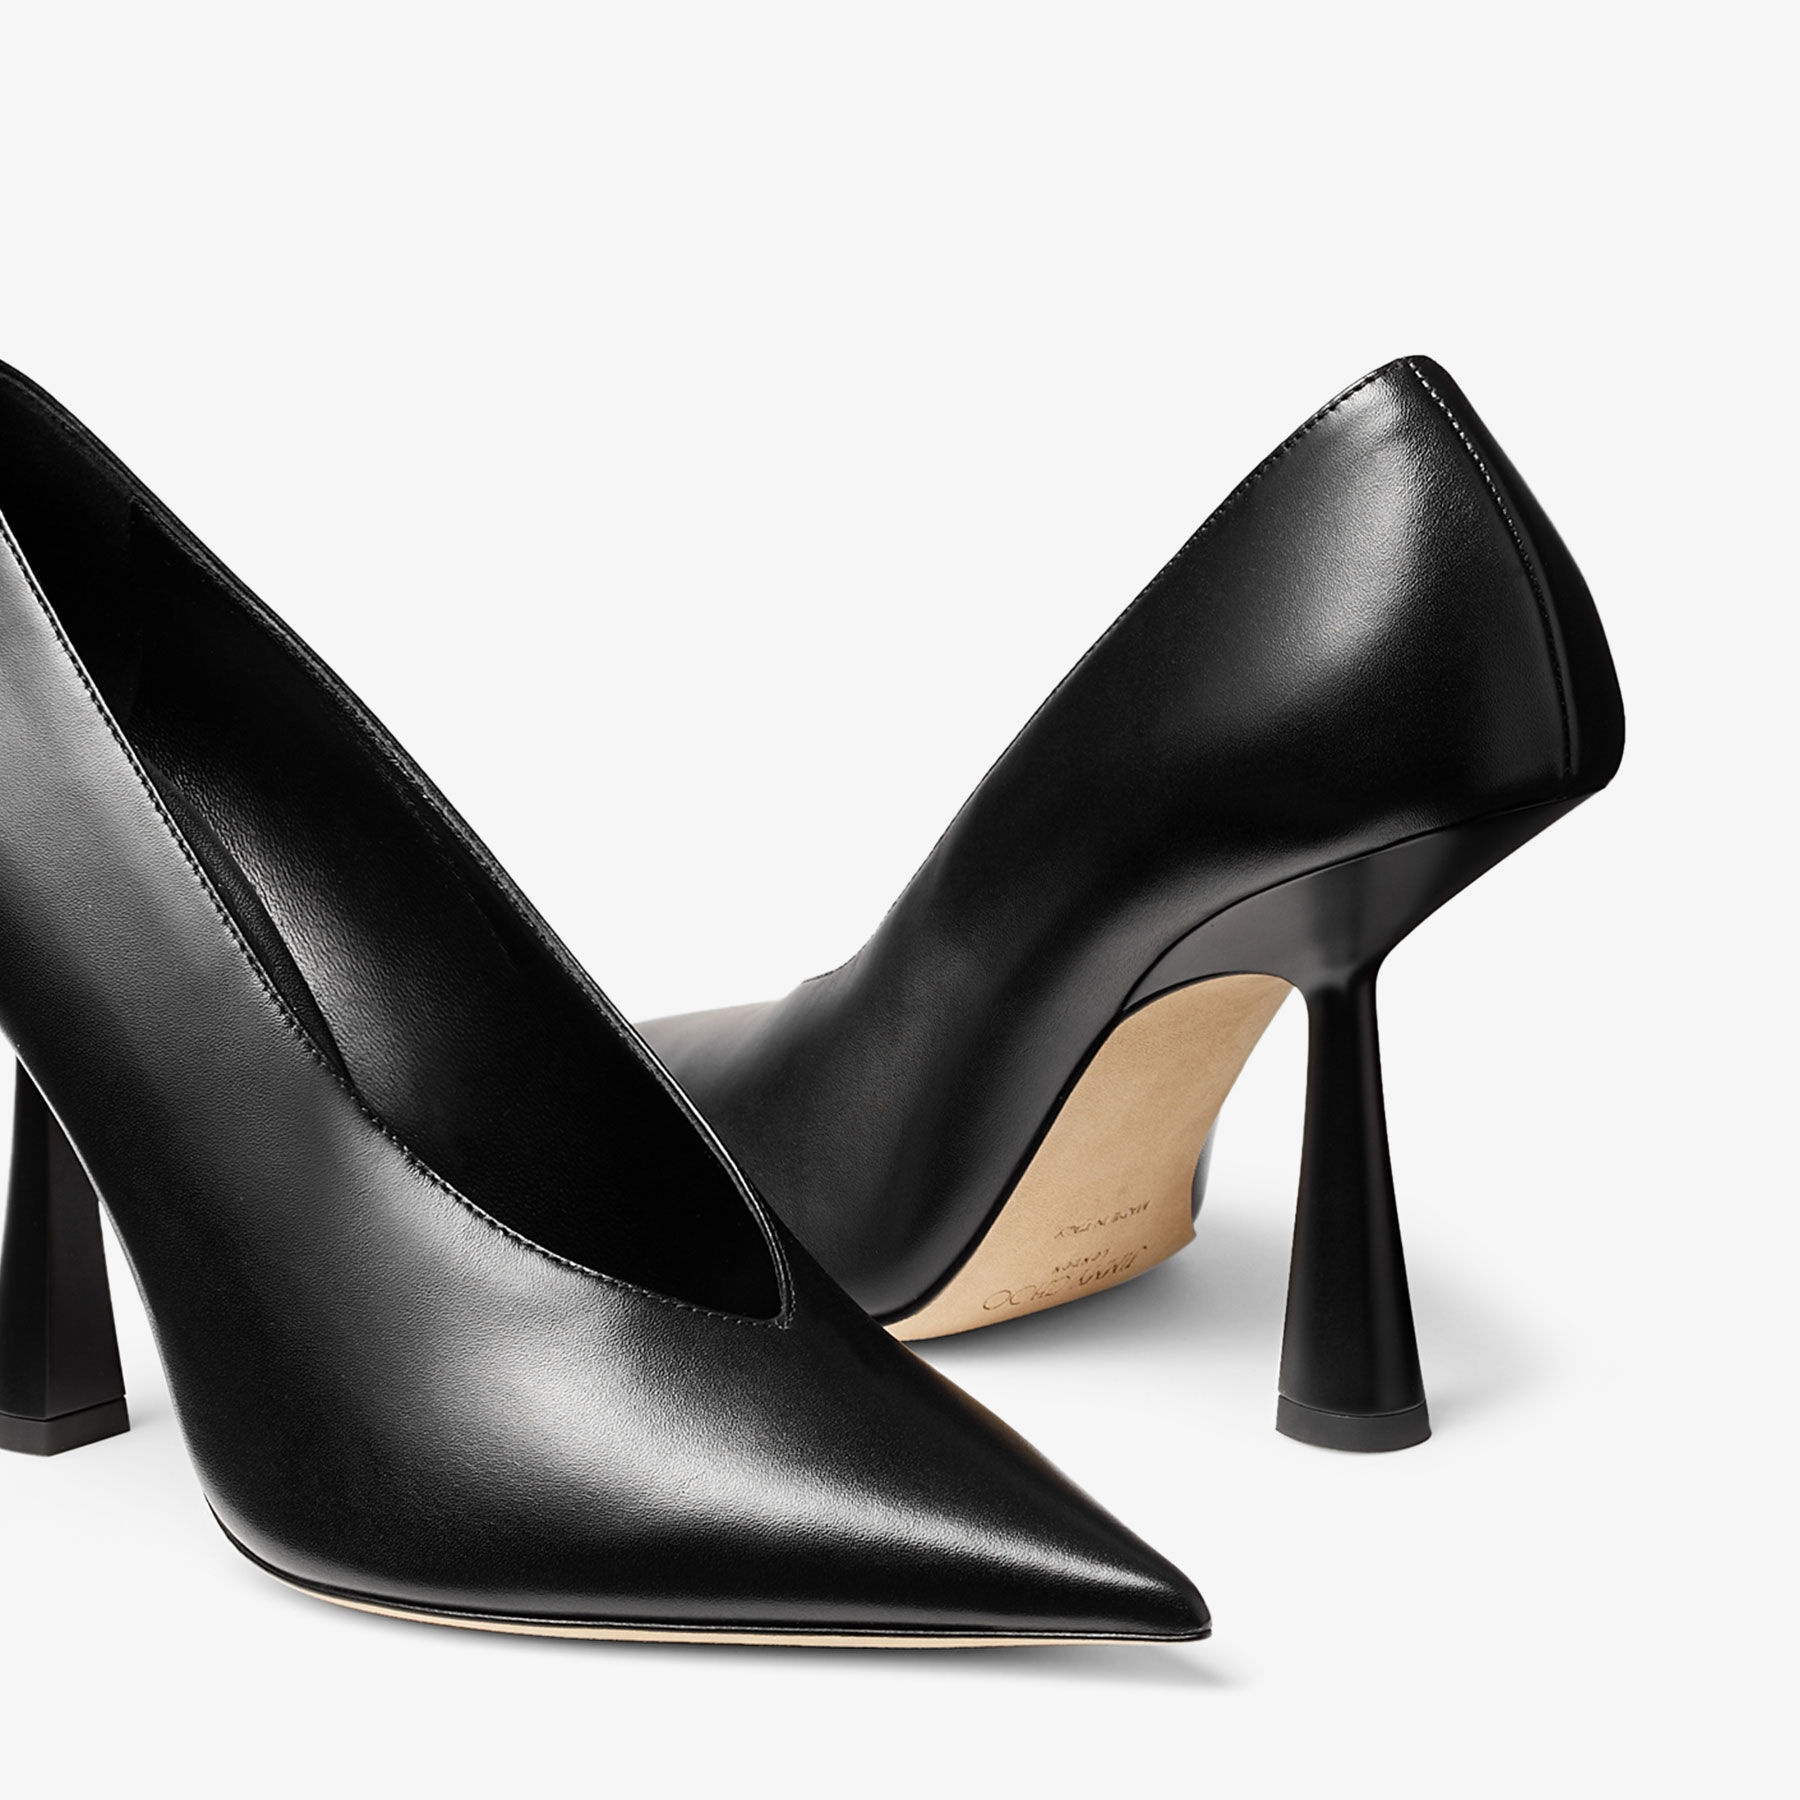 Maryanne 100
Black Calf Leather Pointed-Toe Pumps - 3